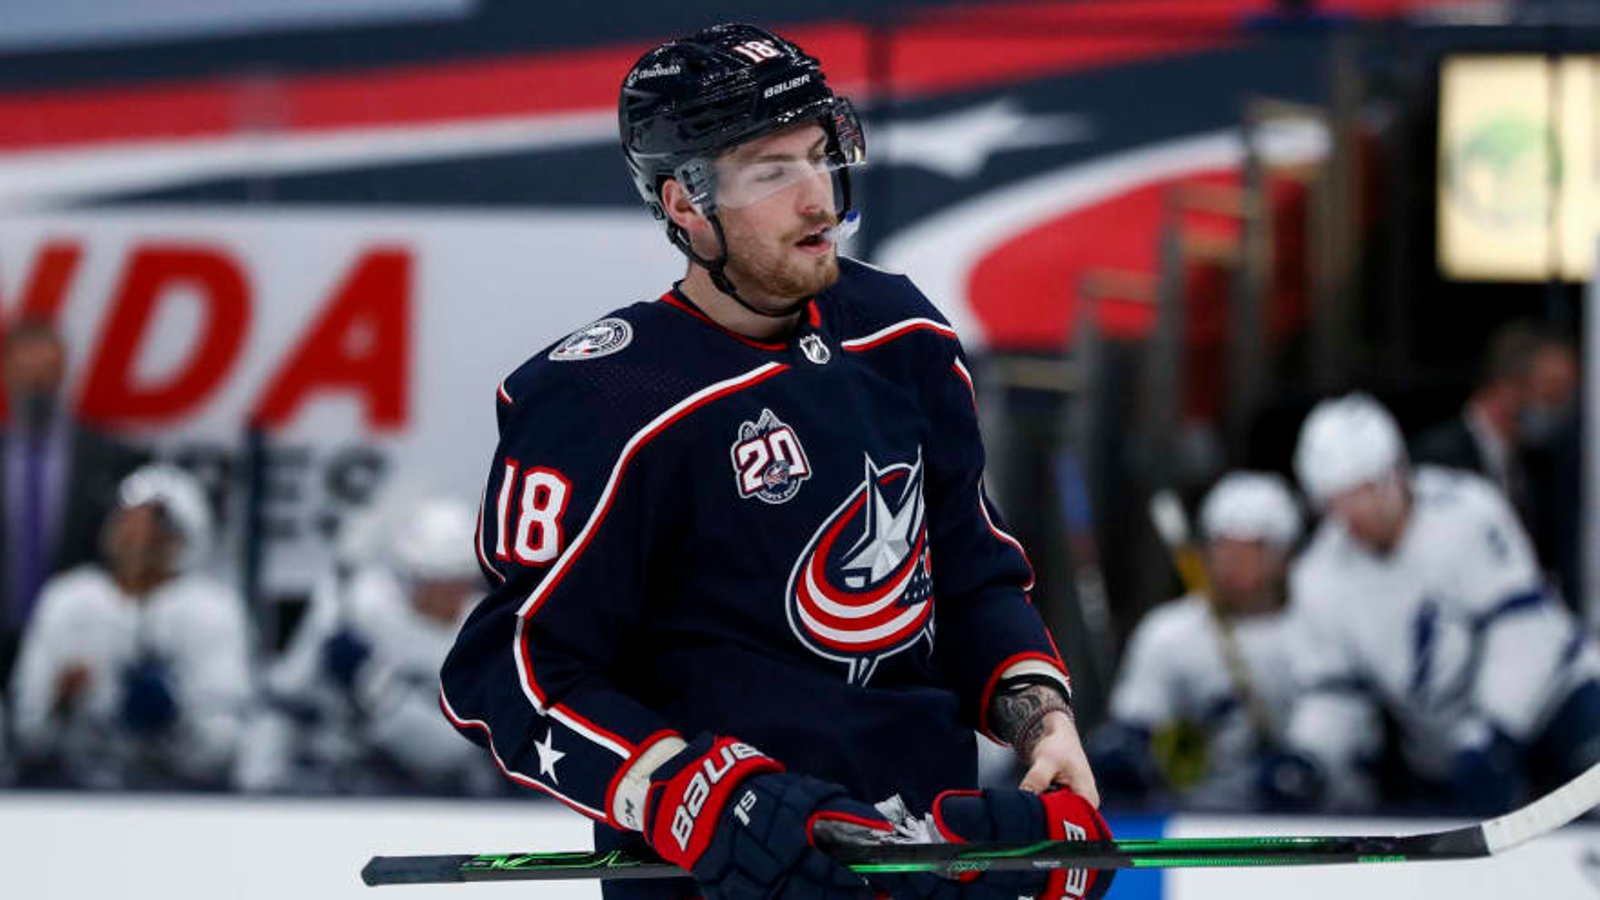 Blue Jackets GM Jarmo Kekalainen throws some shade at Dubois following the trade.